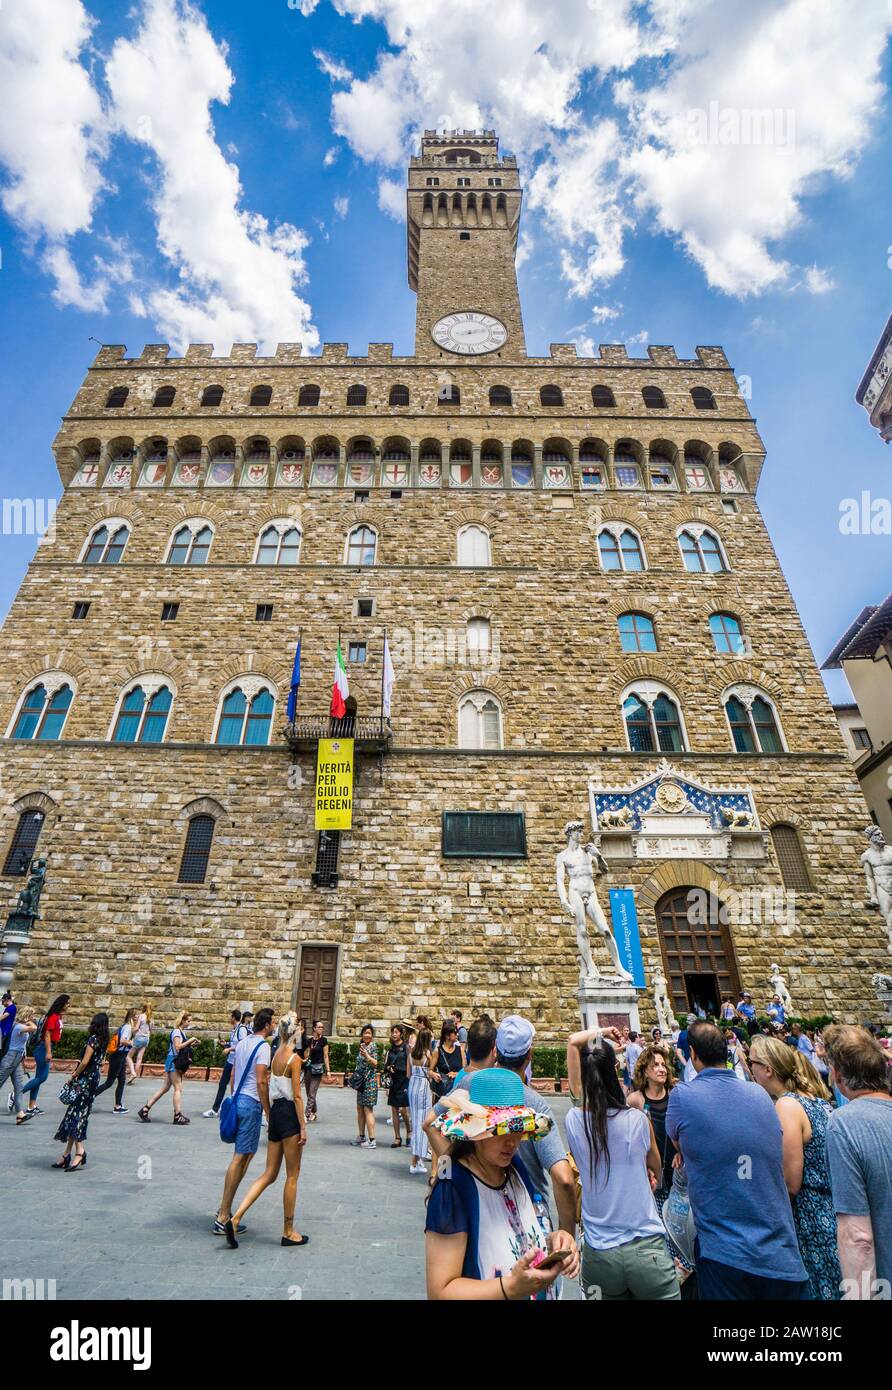 14th-century Palazzo Vecchio with its crenellated tower at Piazza della Signoria, the very center of medieval Florence, Tuscany, Italy Stock Photo